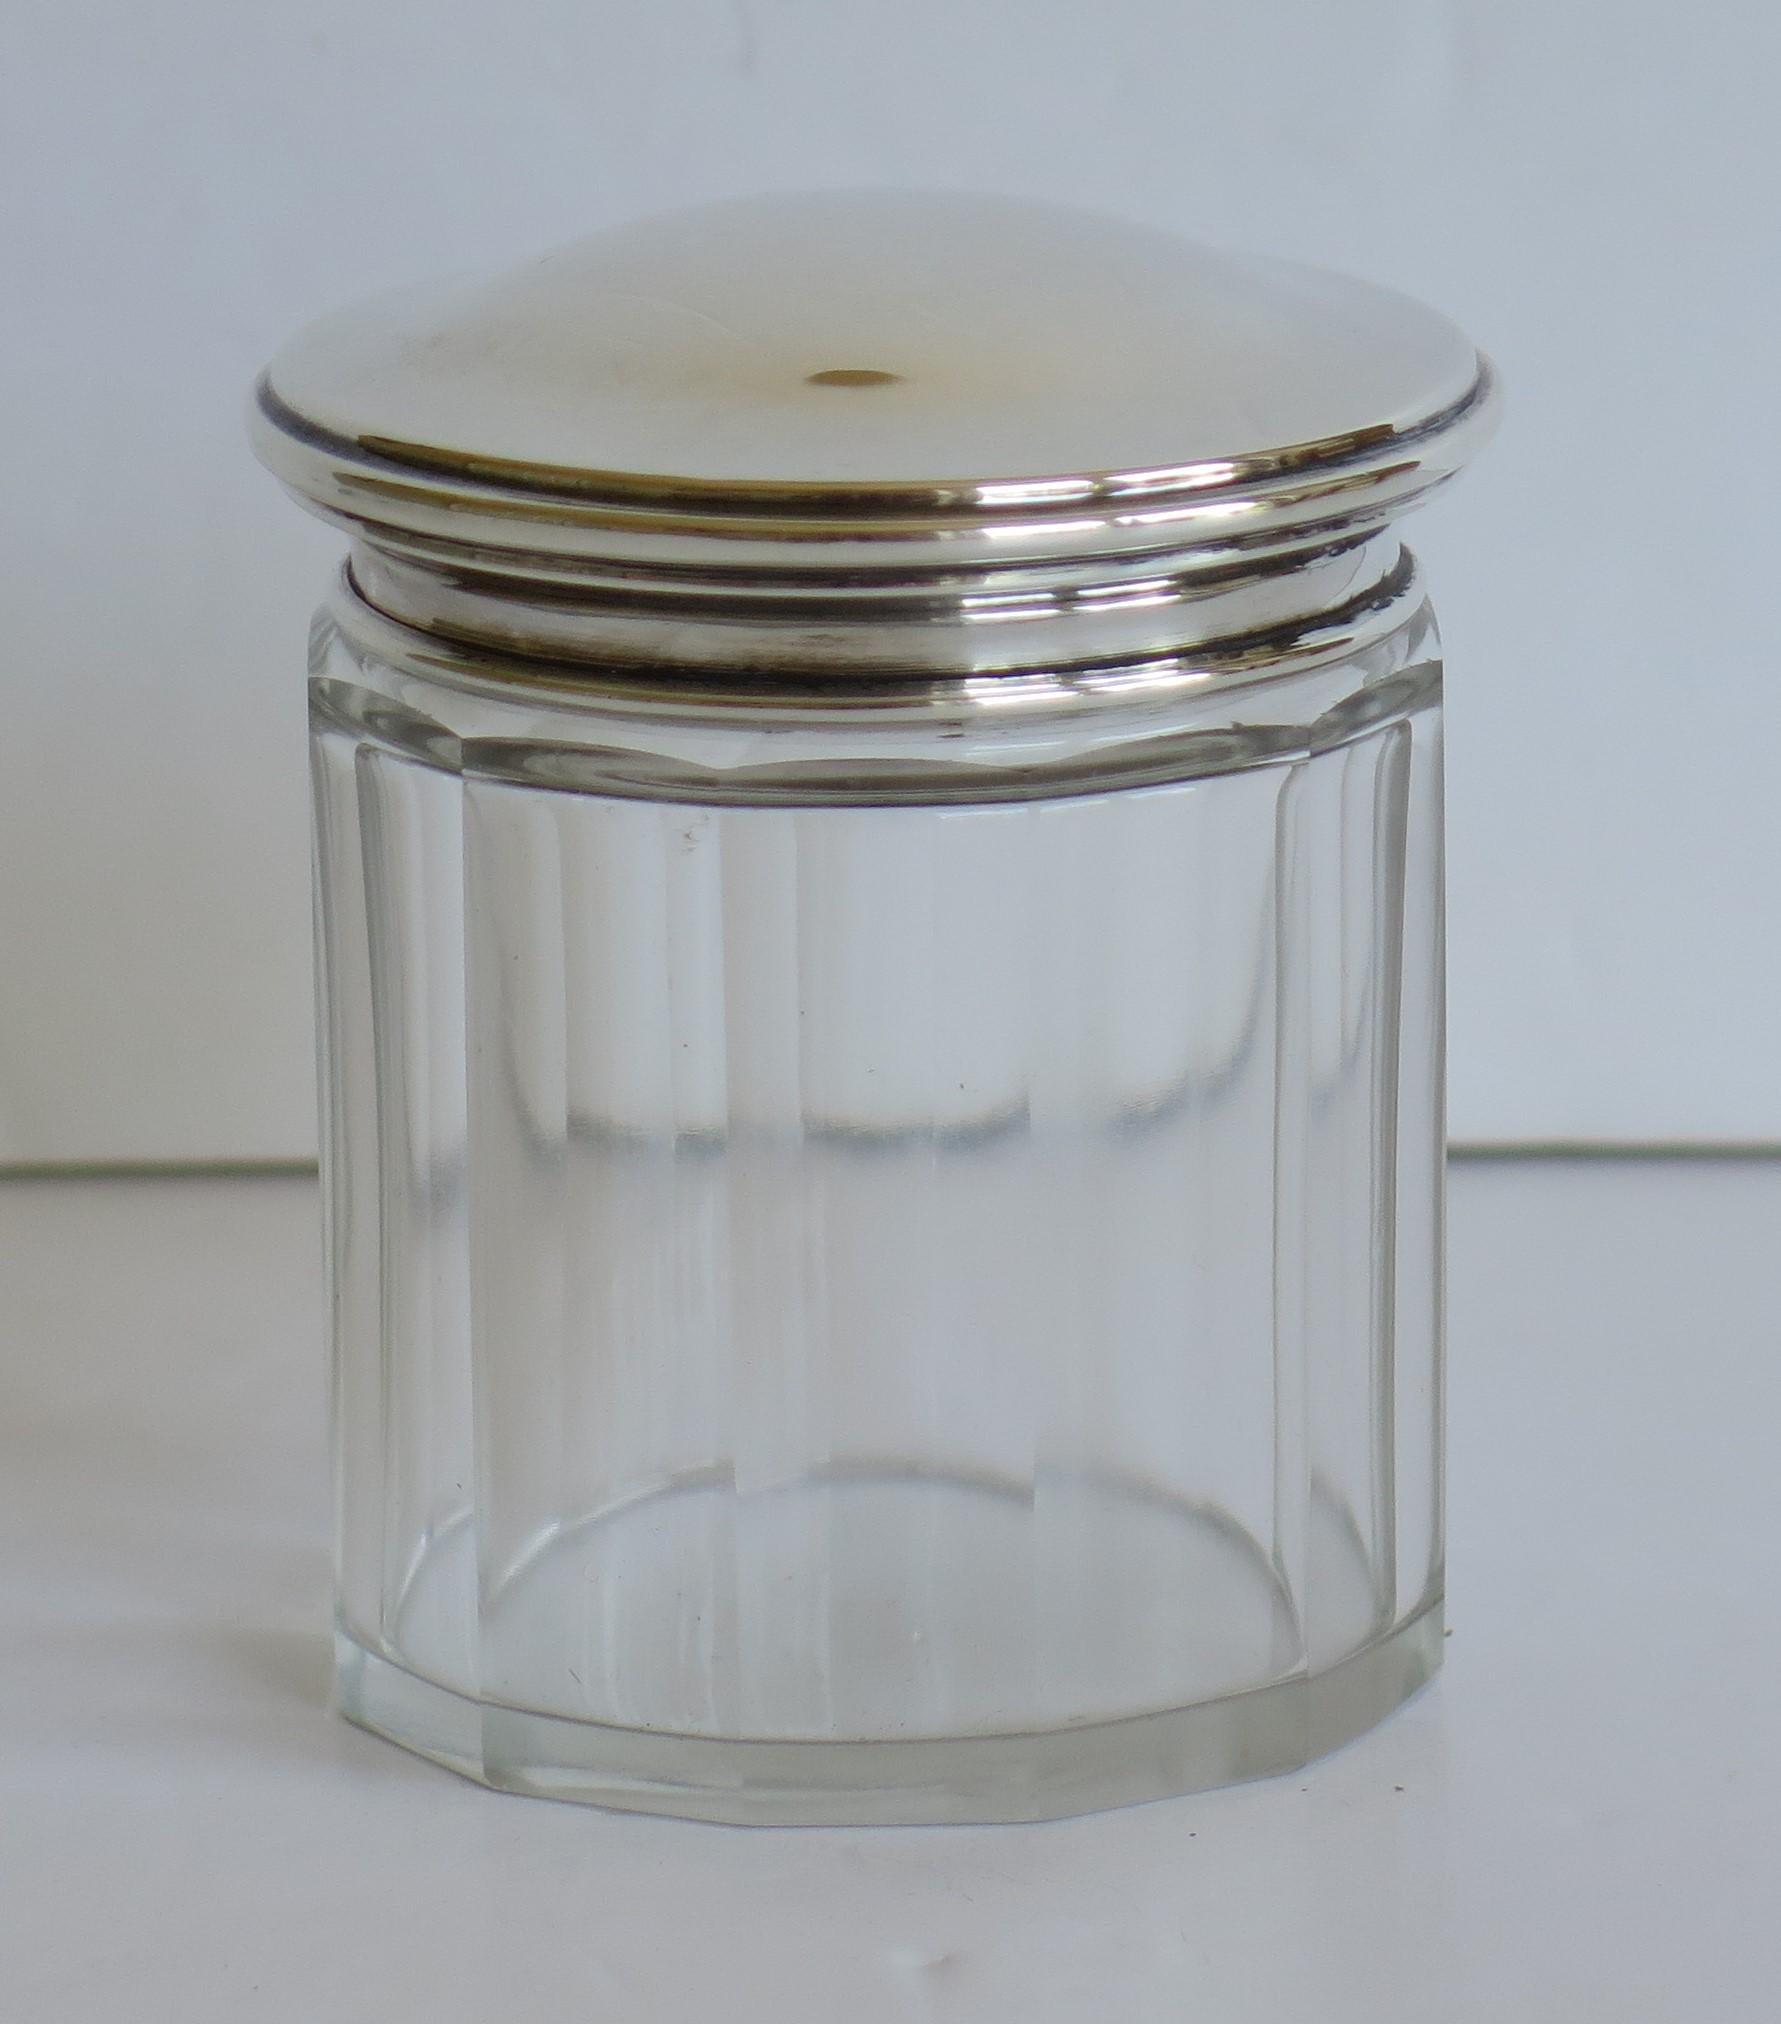 English Crystal Cut Glass Jar with Sterling Silver Top by Owen Williams, Chester, 1922